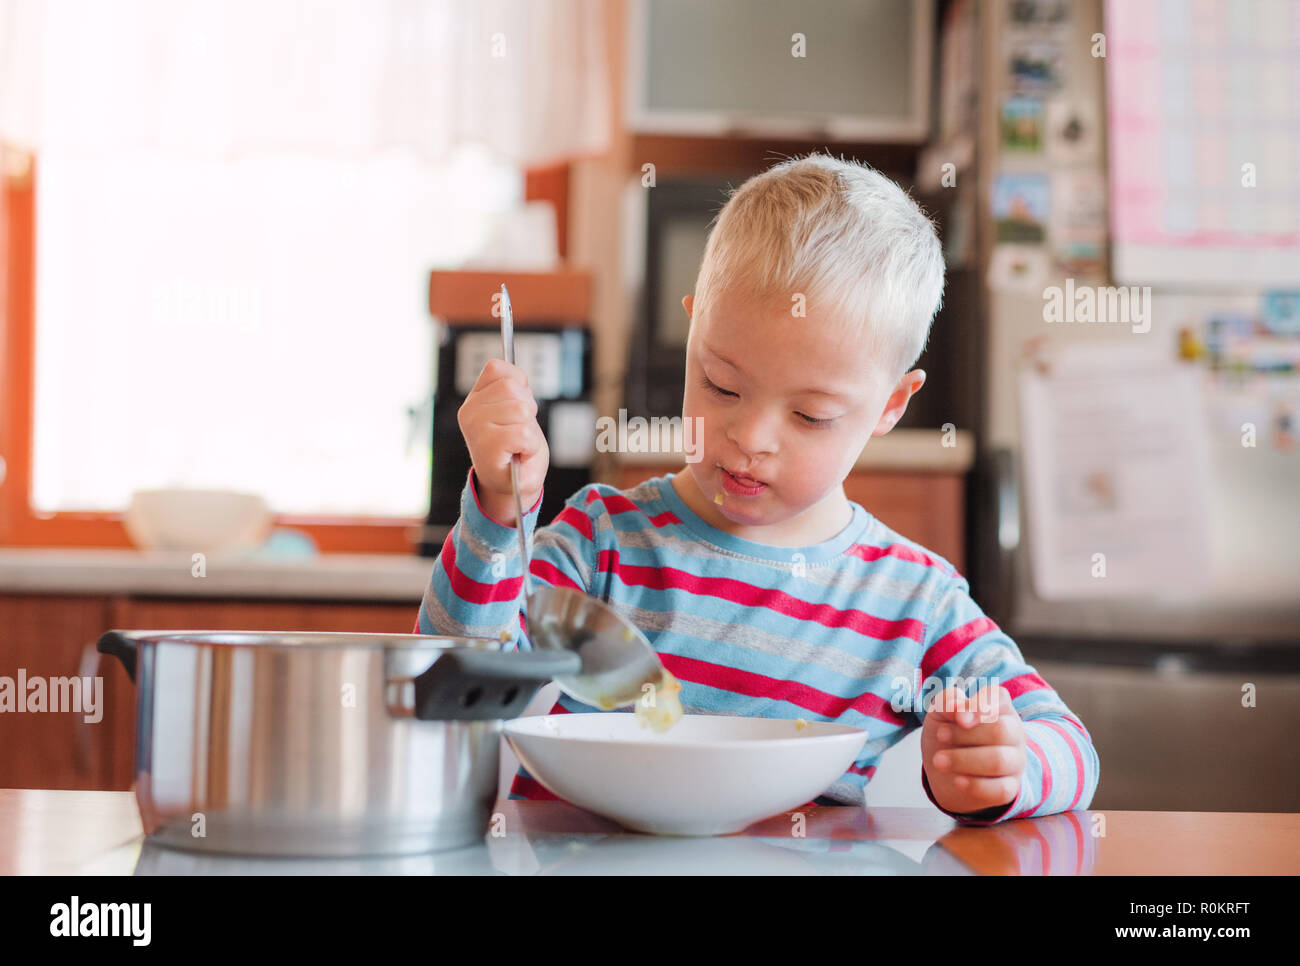 A handicapped down syndrome child pouring soup into a plate indoors. Stock Photo